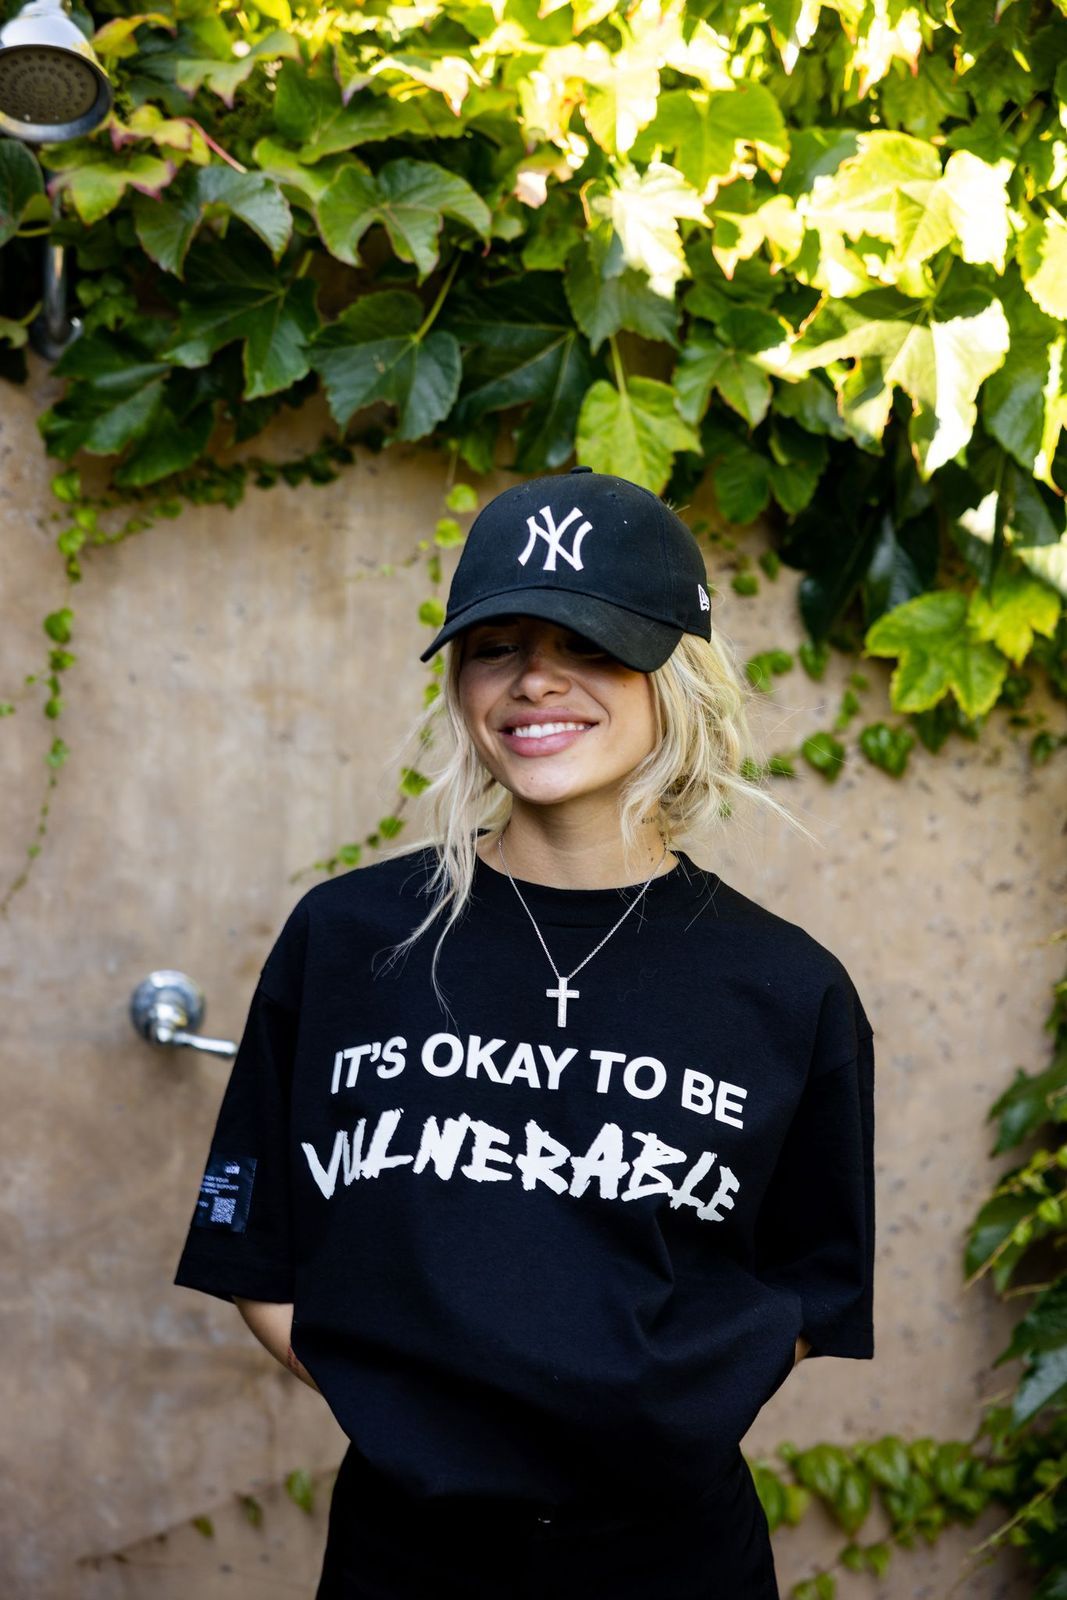 'It's OK to be Vulnerable' Tee